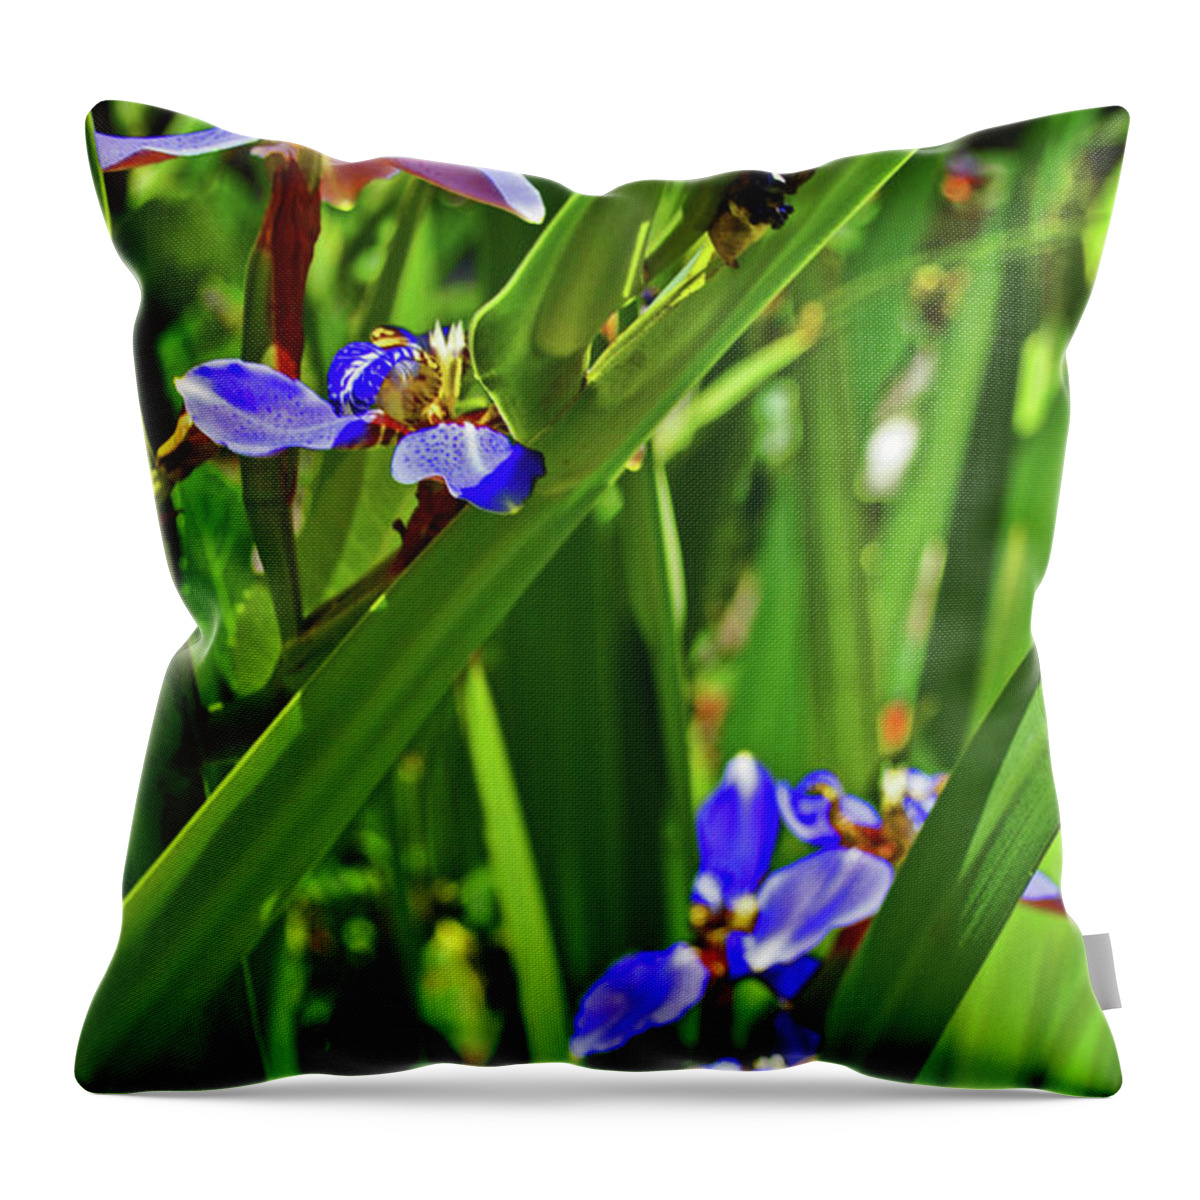 Flower Throw Pillow featuring the photograph Iris by George D Gordon III